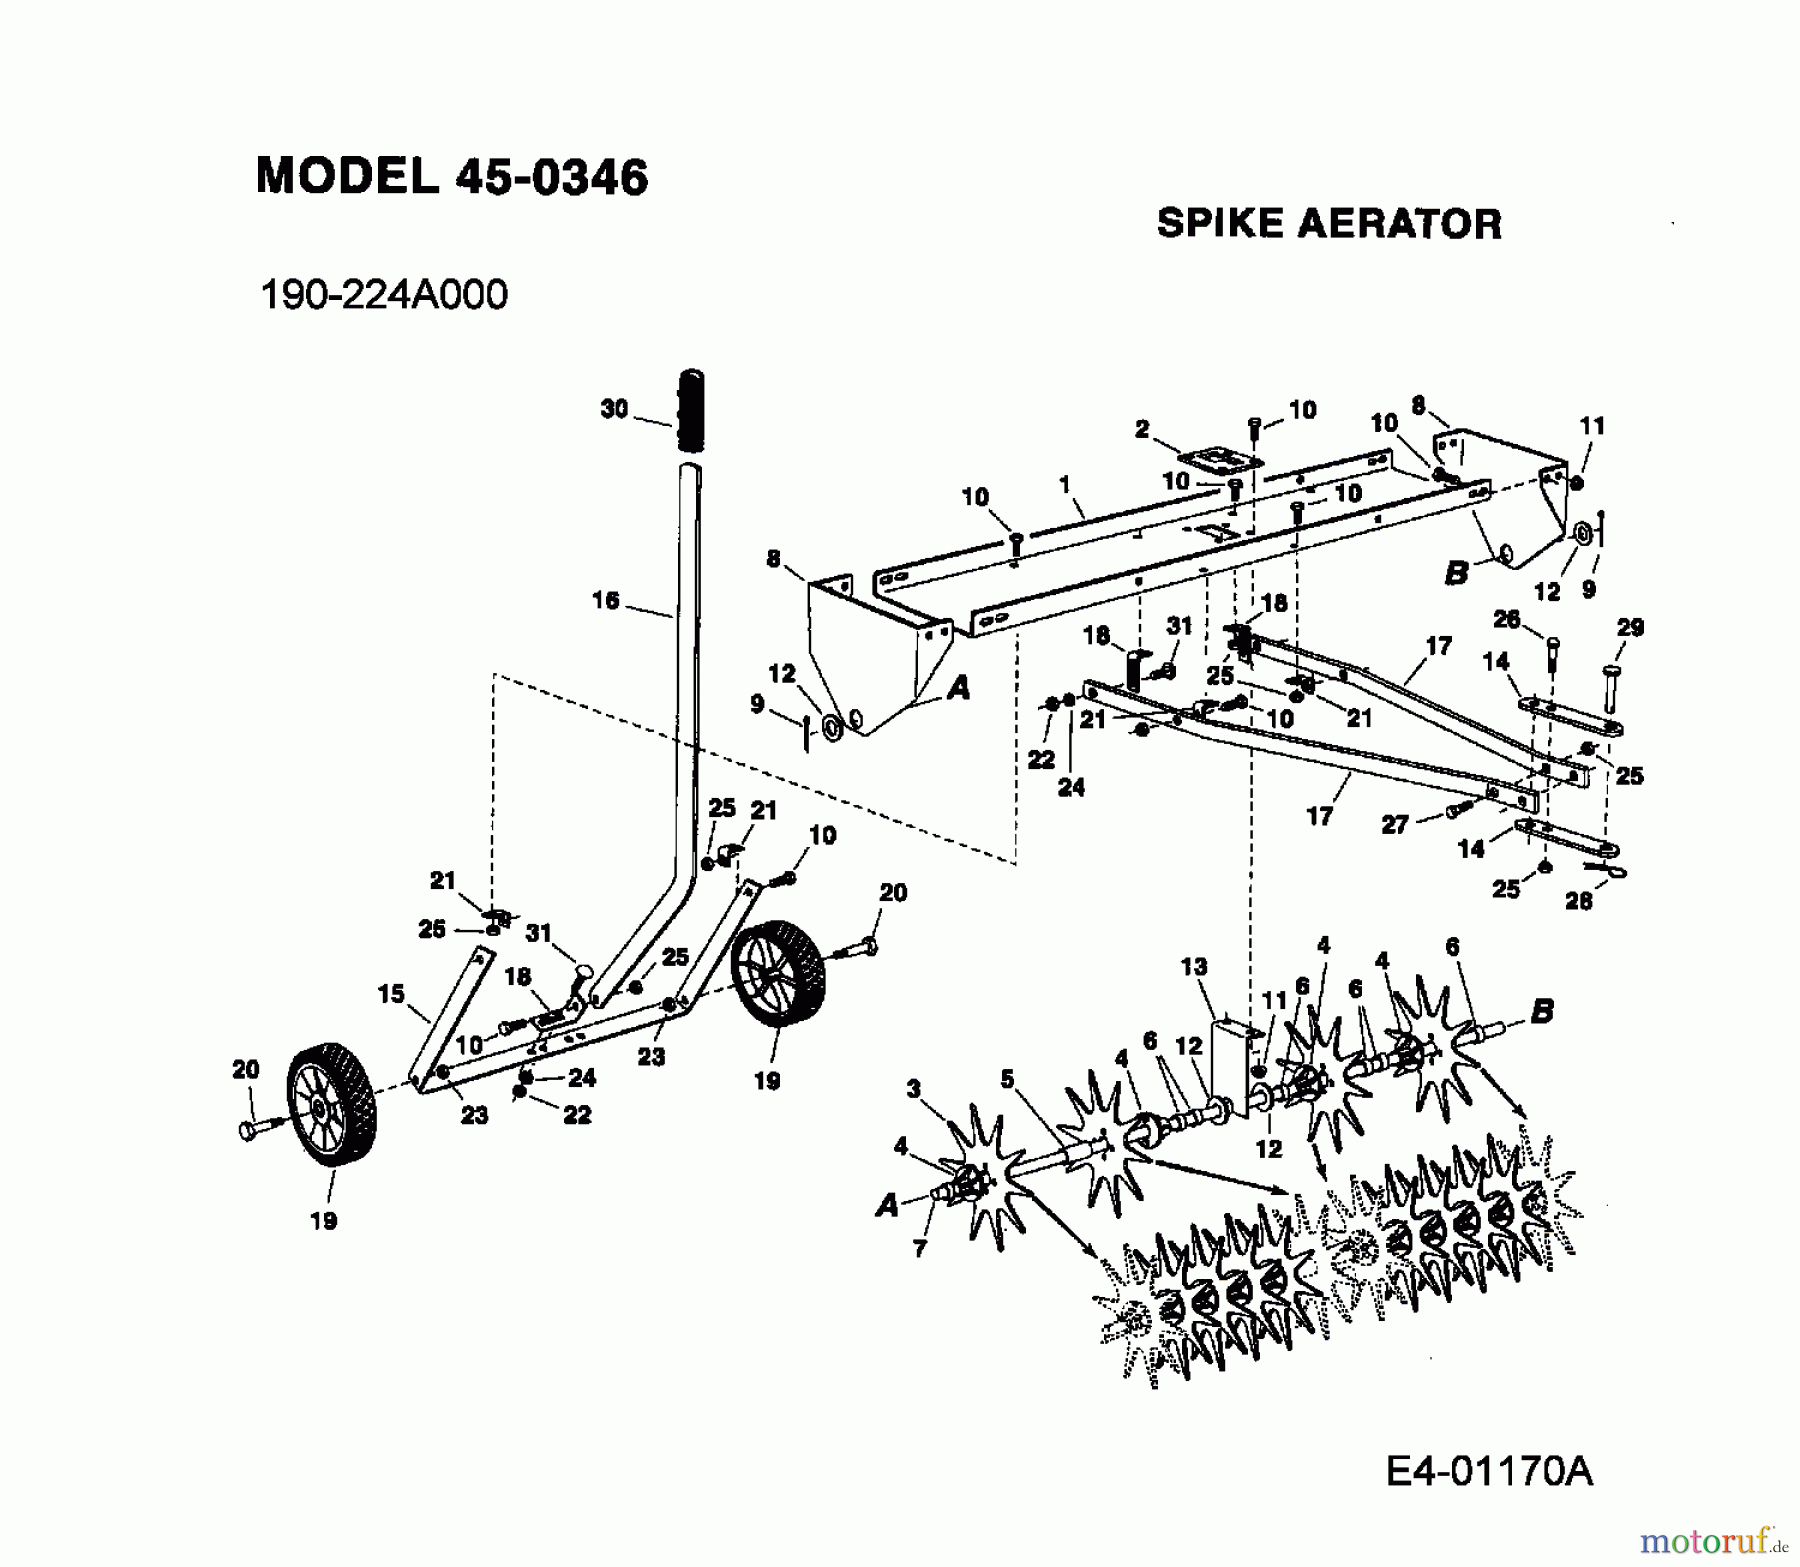  MTD Accessories Accessories garden and lawn tractors Groomer 45-0346  (190-224A000) 190-224A000  (2005) Basic machine